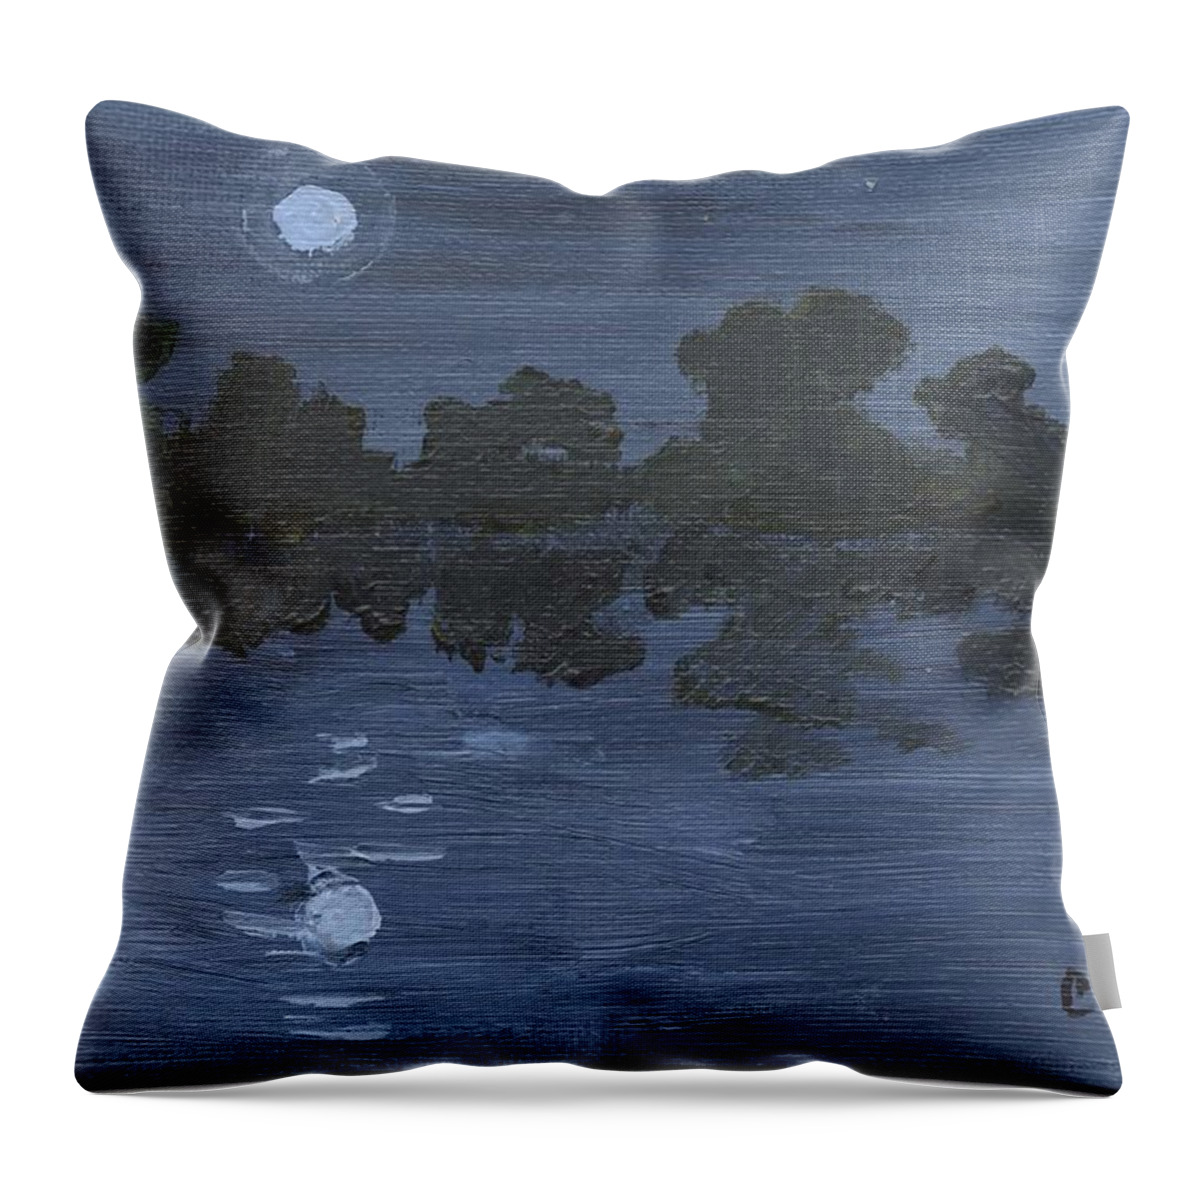 Blue Throw Pillow featuring the painting Moonlit River by Caroline Henry